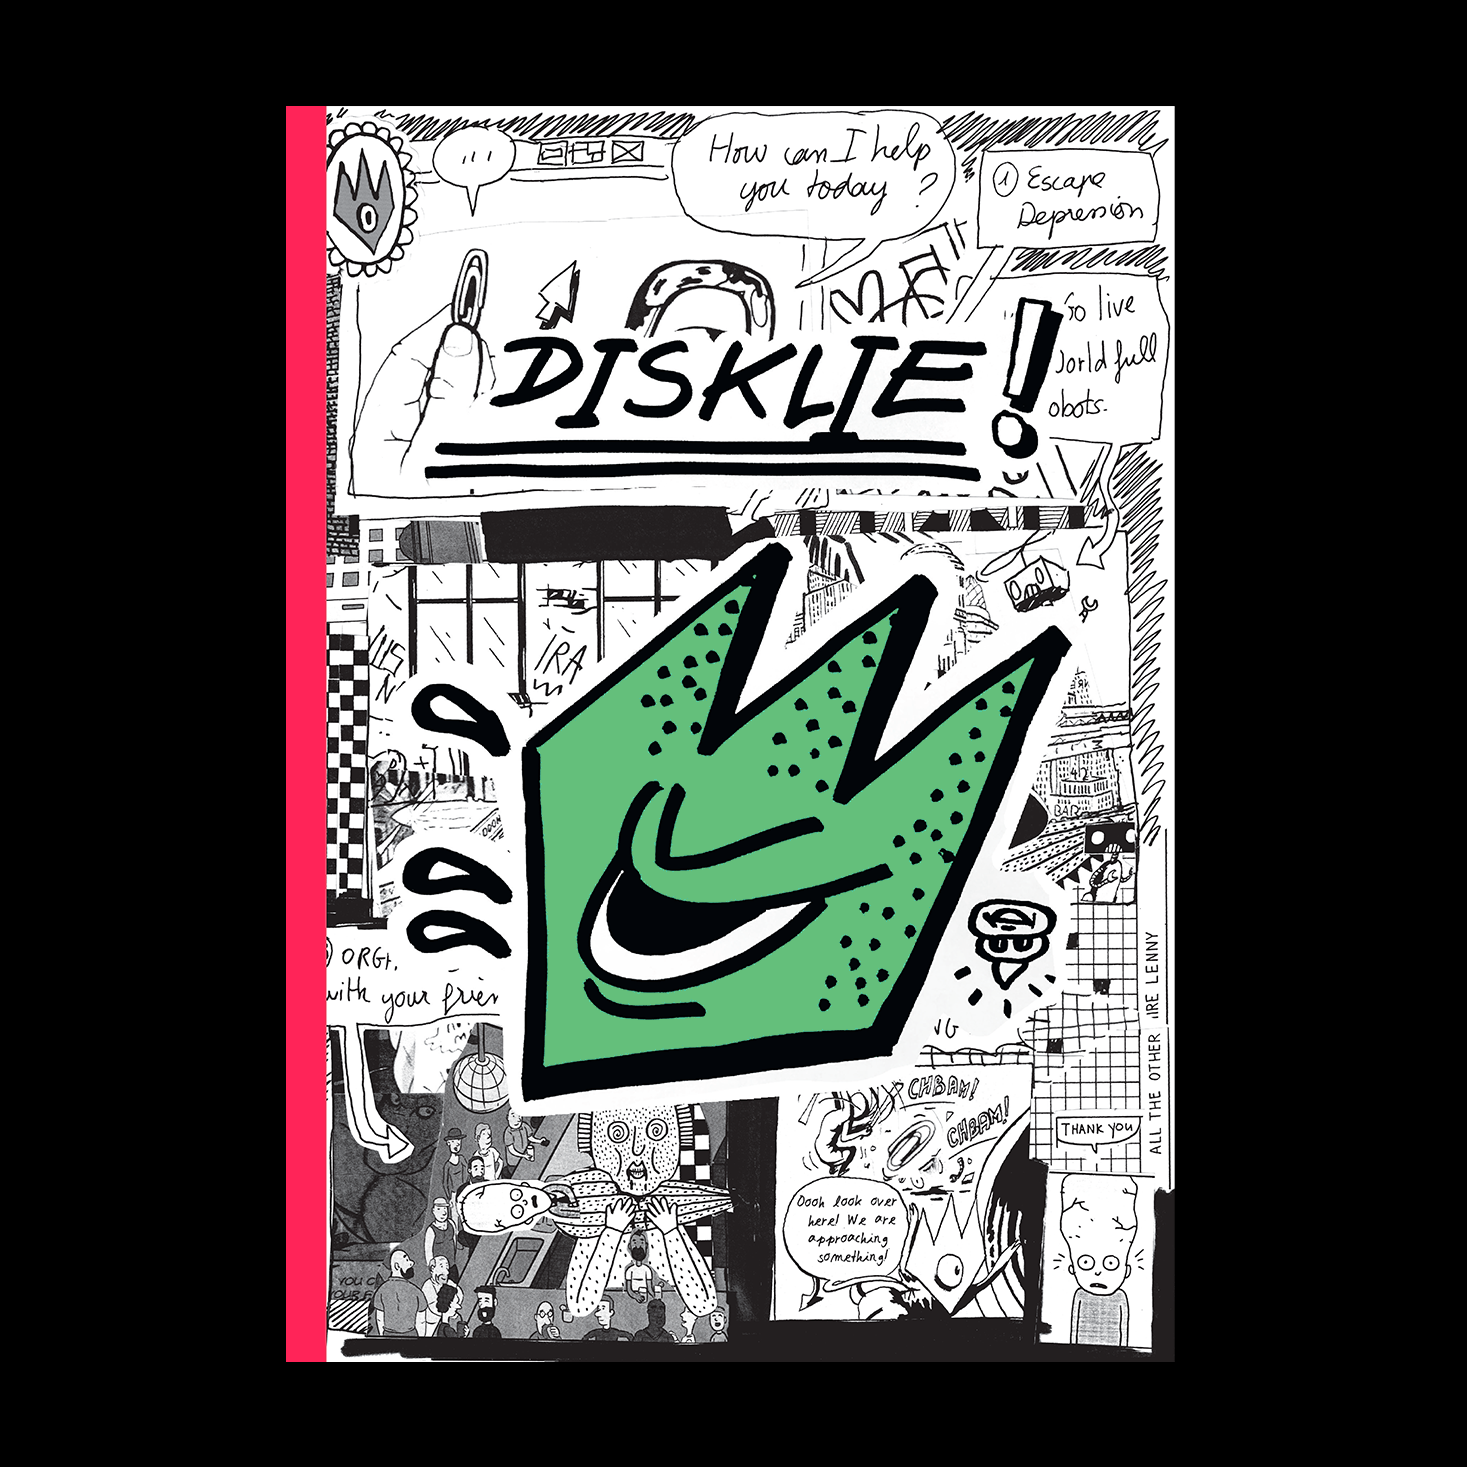 DISKLIE zine cover, features WEIRD comics logo and comic collage page as background.